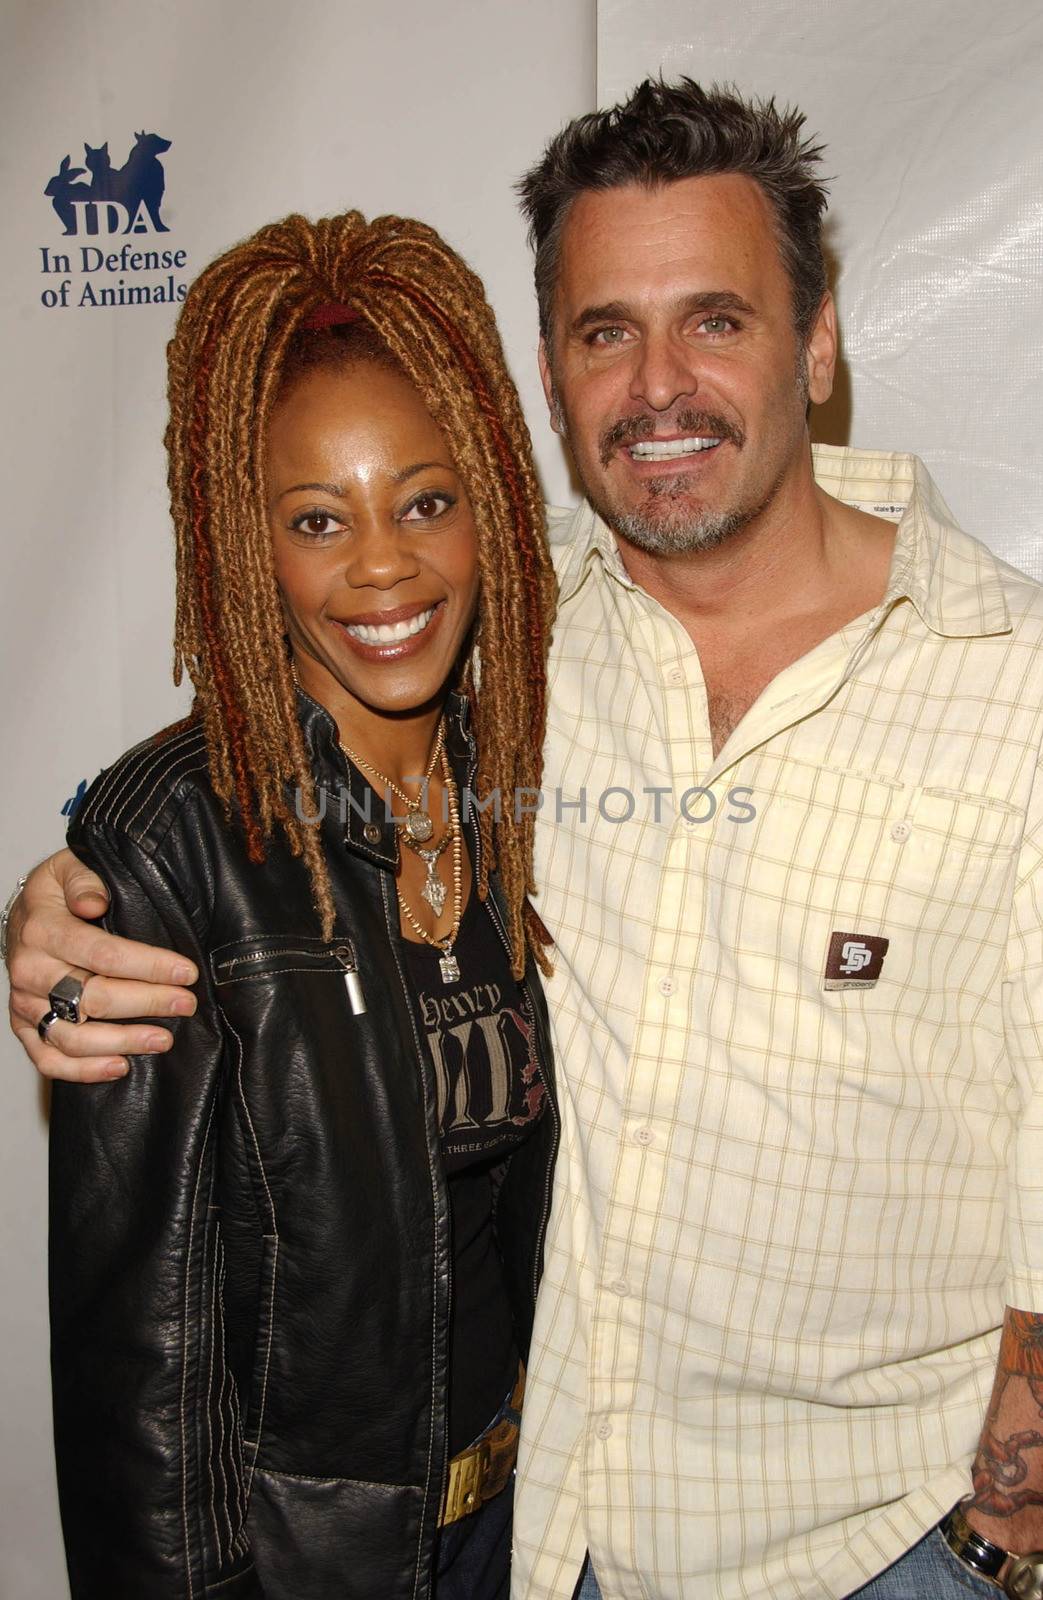 Debra WIlson and husband Cliff
at the In Defense of Animals Benefit Concert. Paramount Theater, Hollywood, CA. 02-17-07